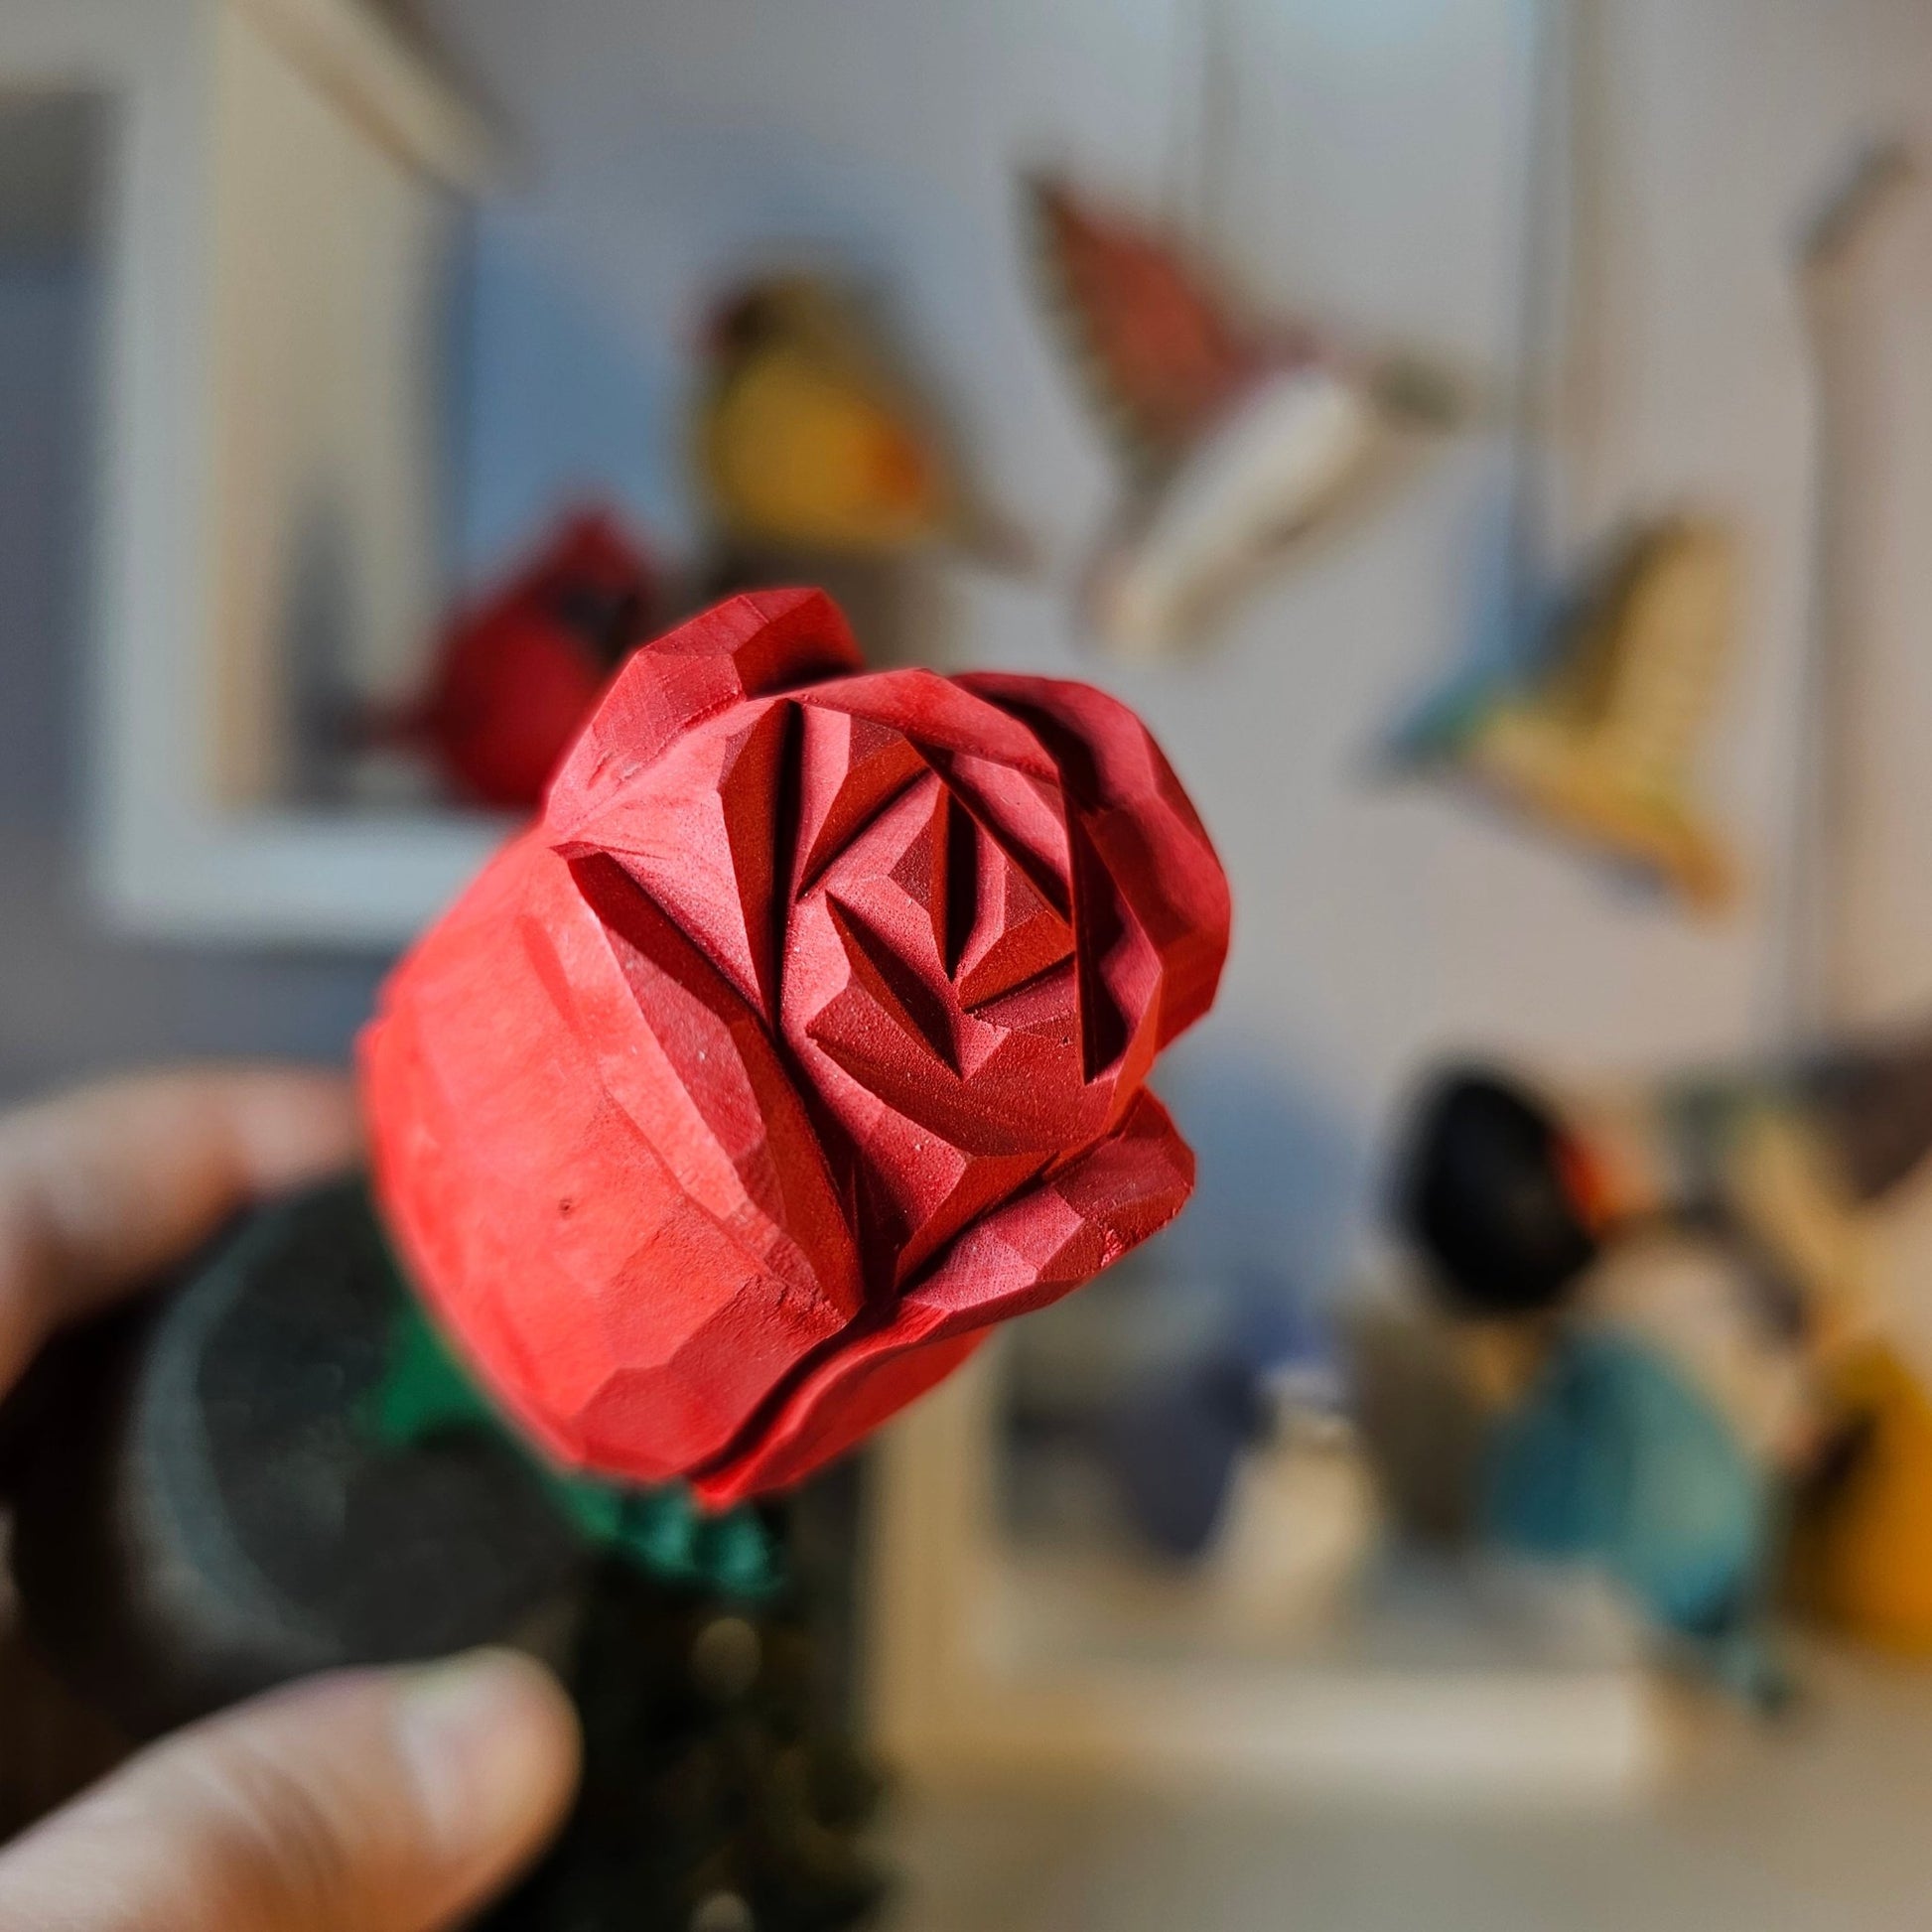 Handmade Wooden Rose - Exquisite Hand-Painted Floral Decor - Wooden Islands